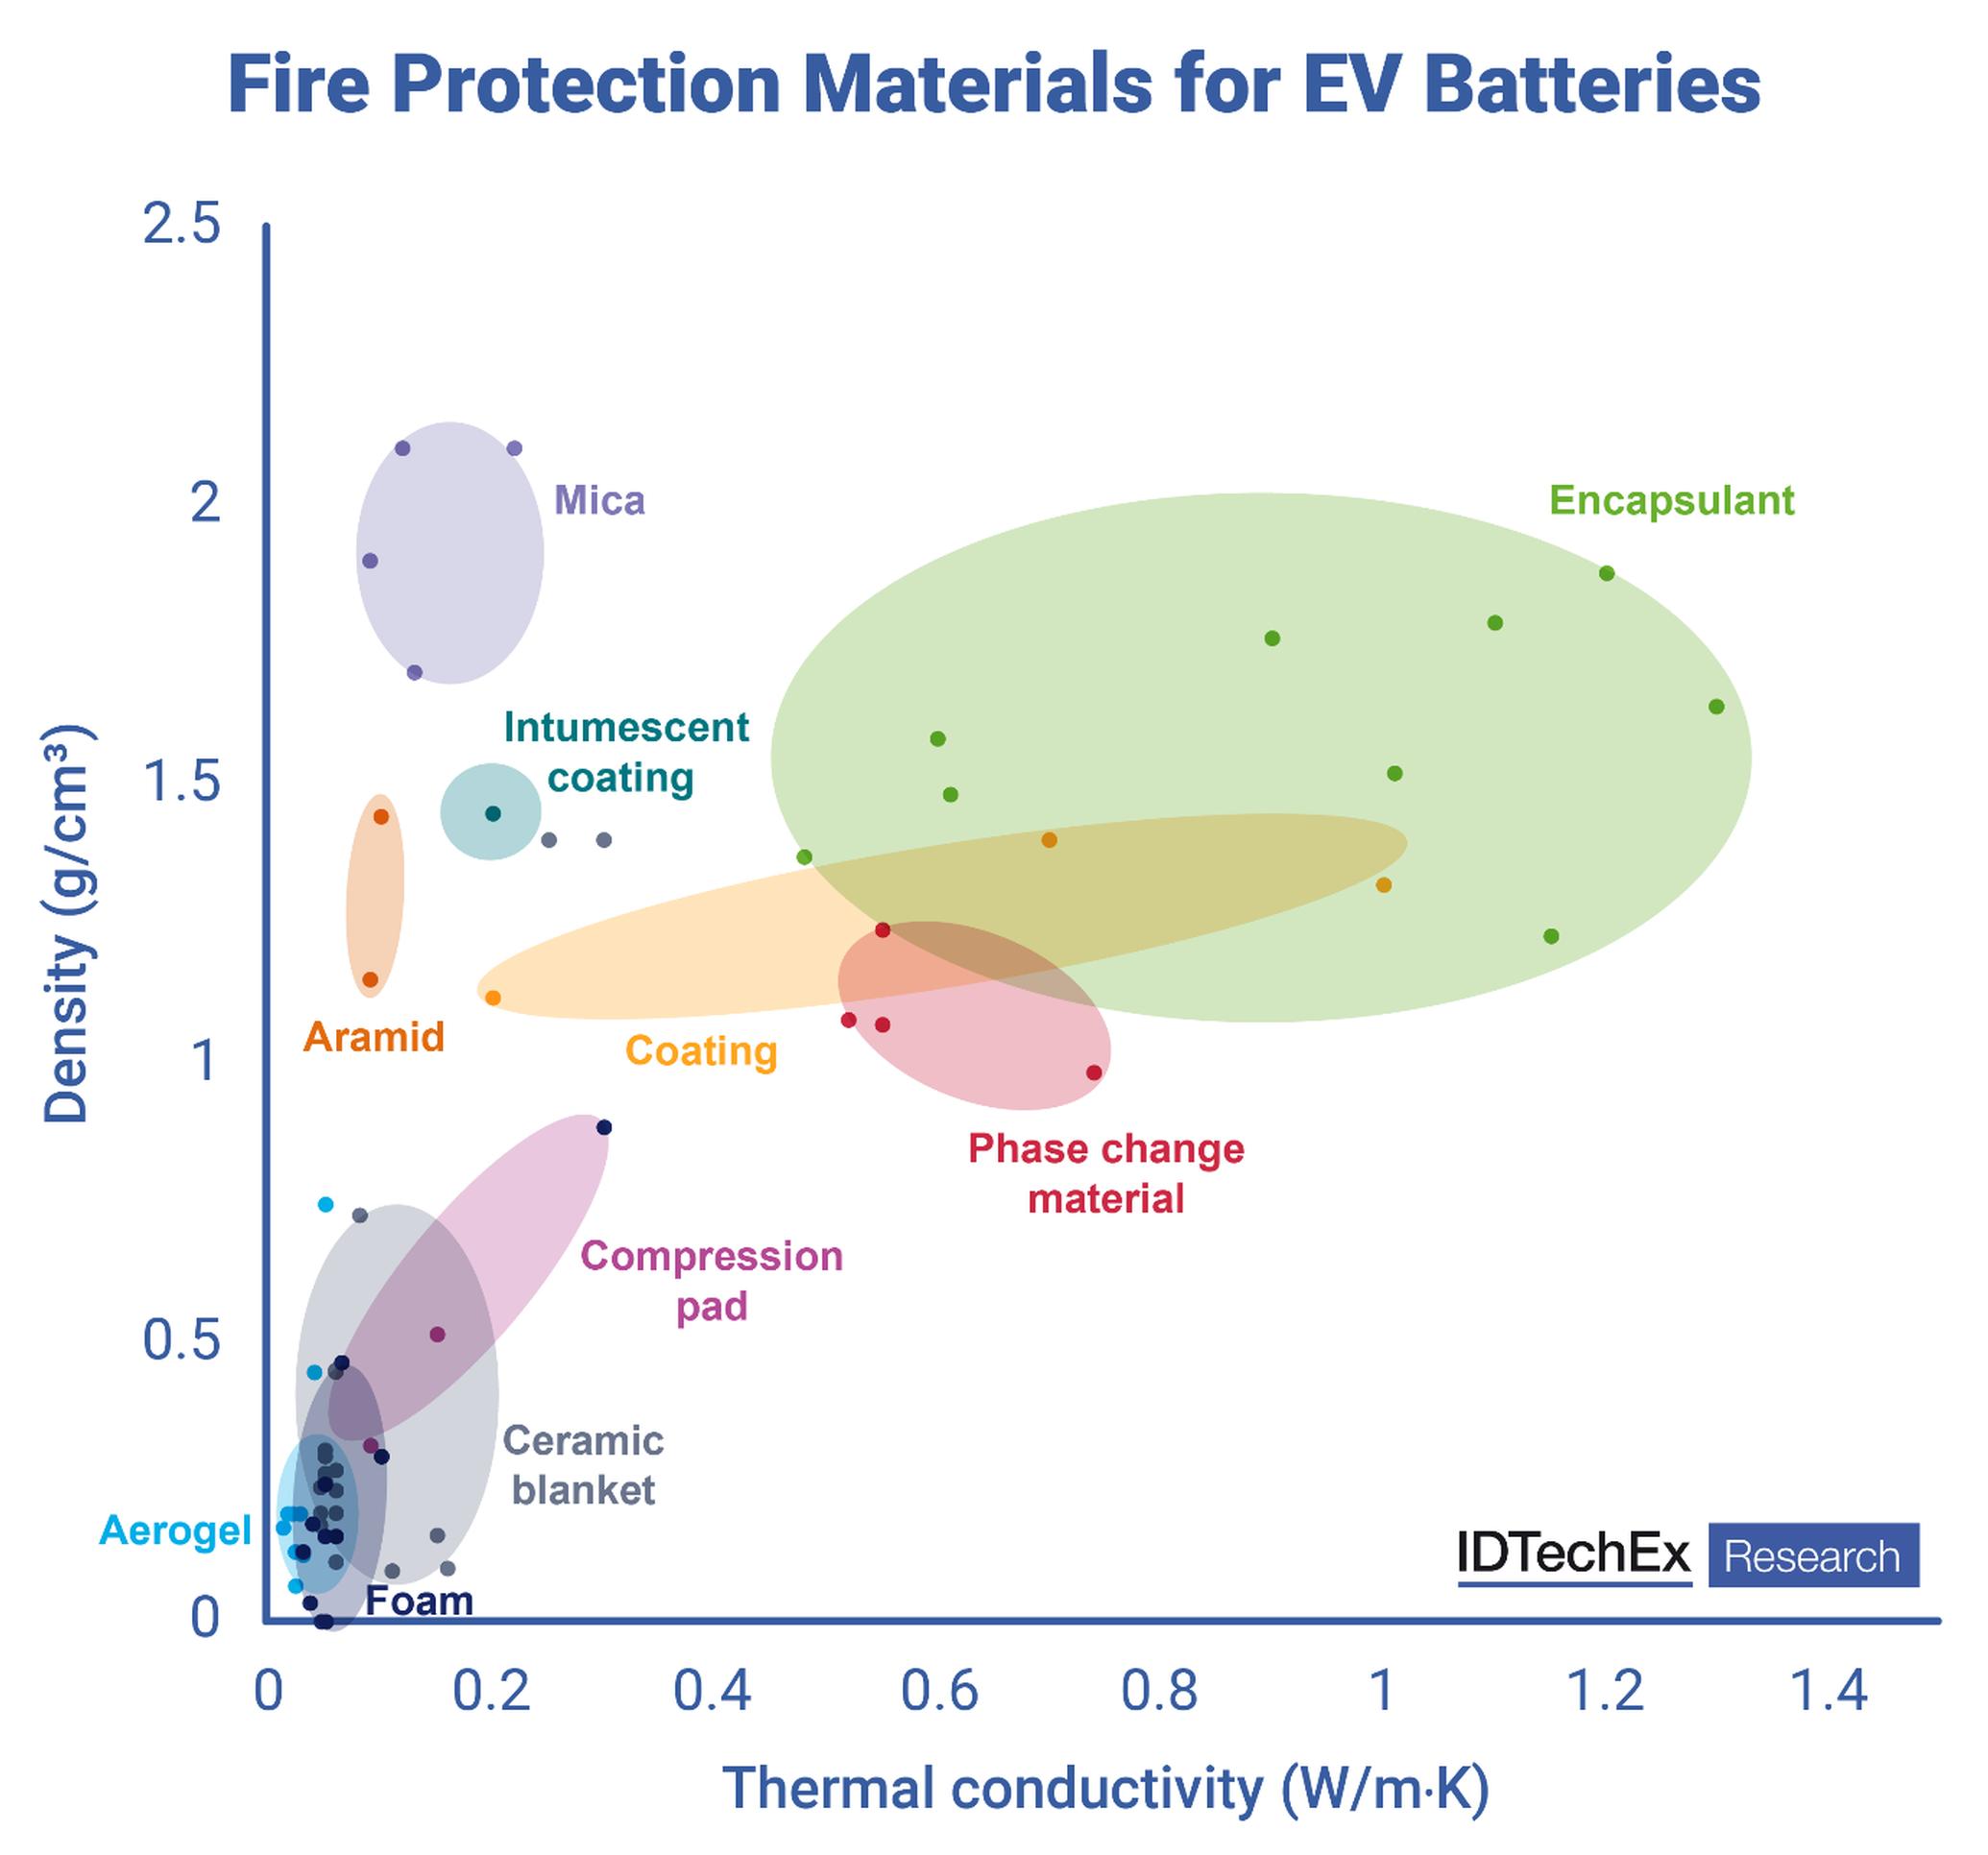 A critical issue: Fire safety in electric vehicles